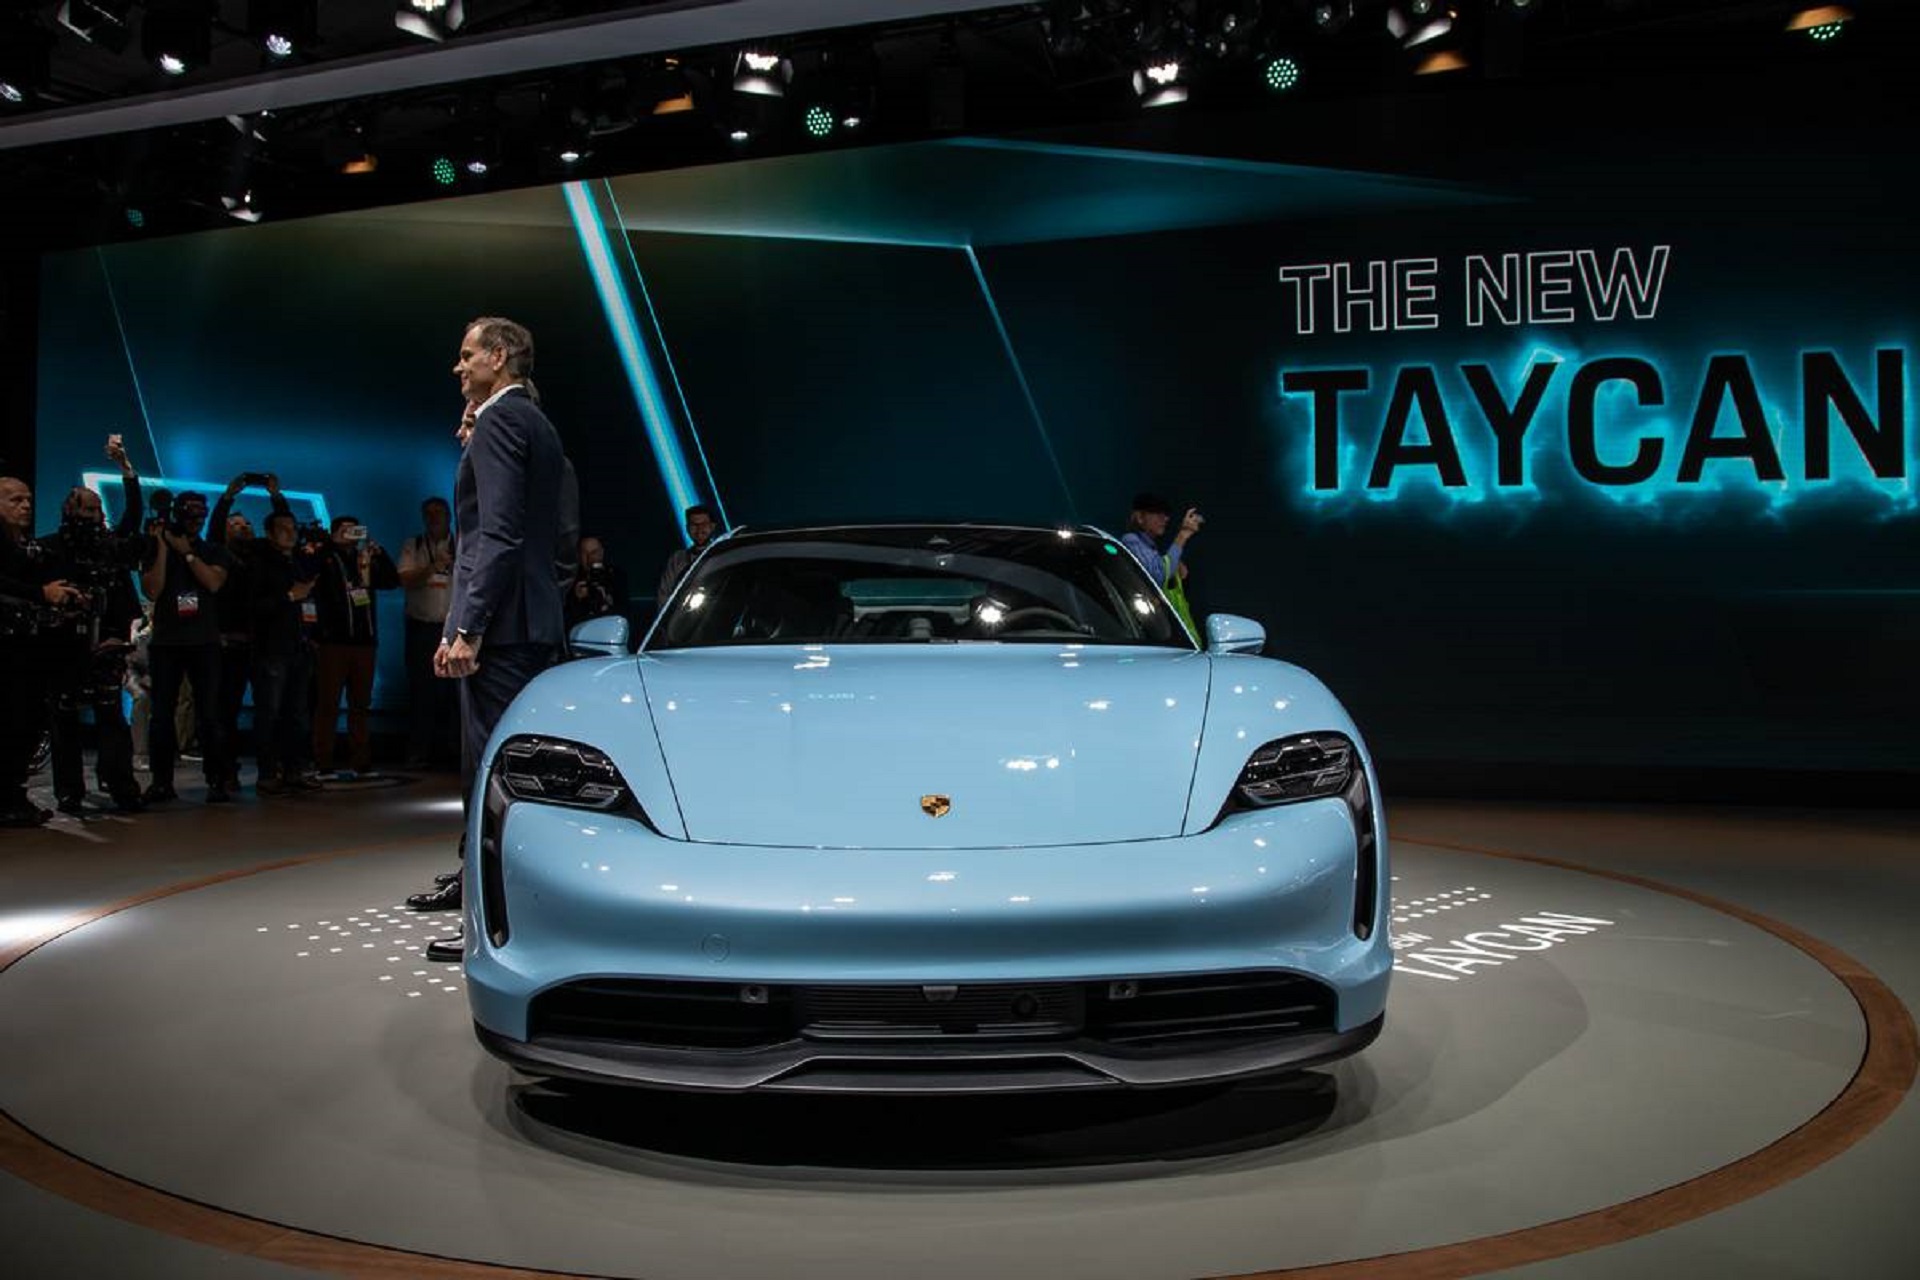 Porsche Taycan Launched In India At Rs 1.5 Crores